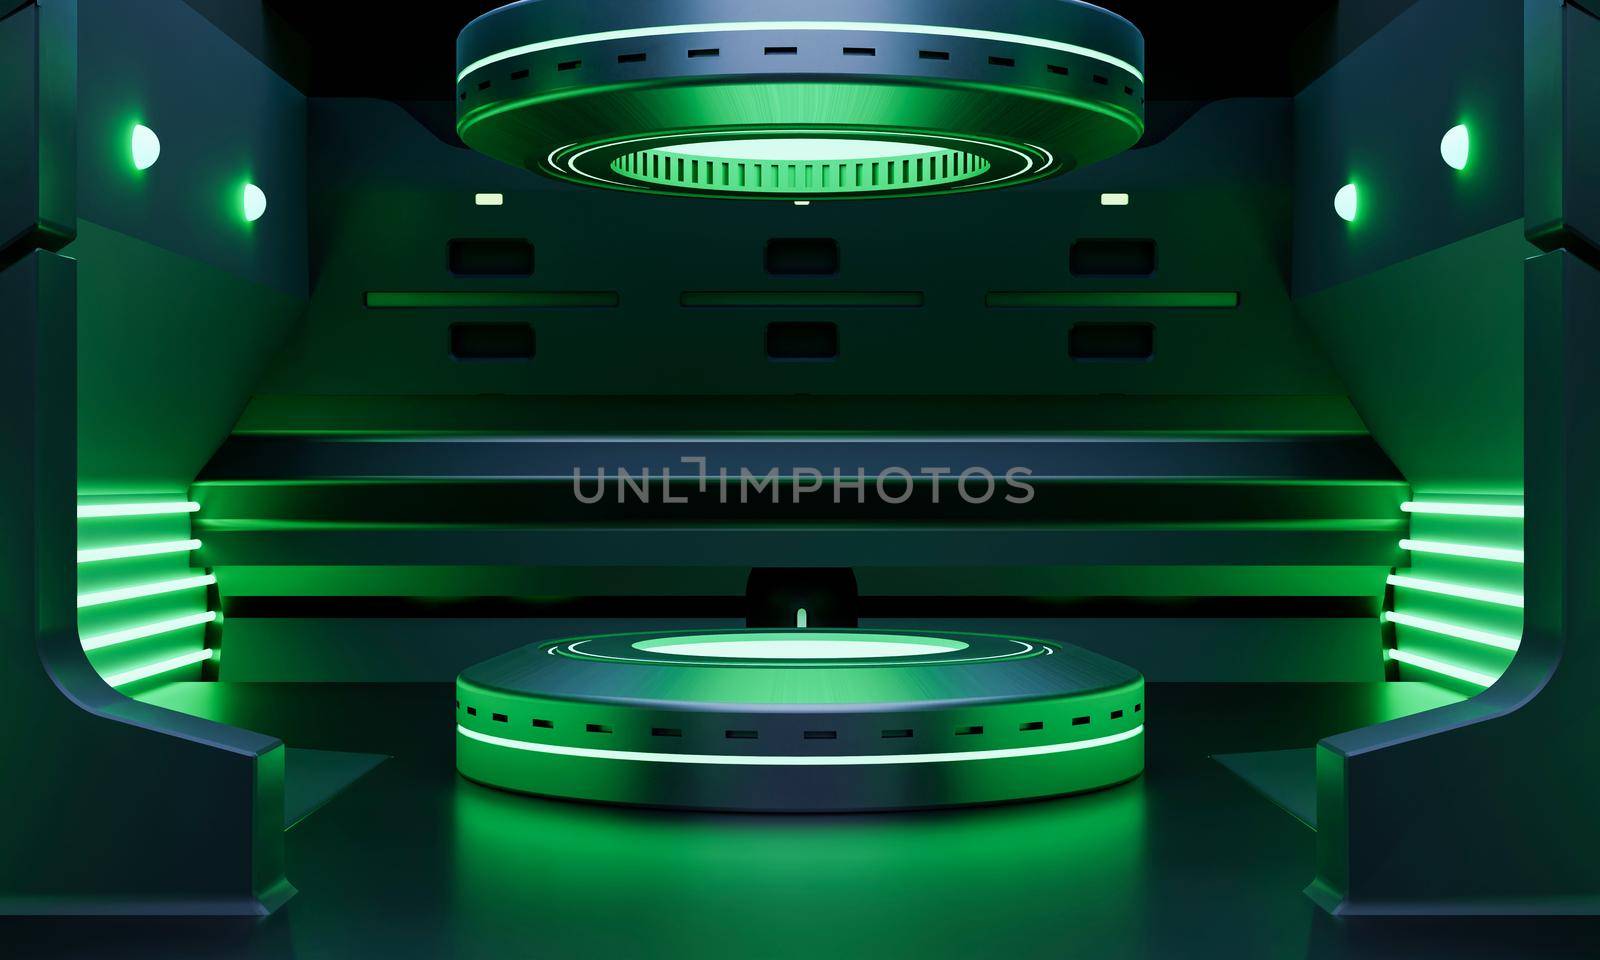 Cyberpunk sci-fi product podium showcase in spaceship with green neon lighting background. Technology and object concept. 3D illustration rendering